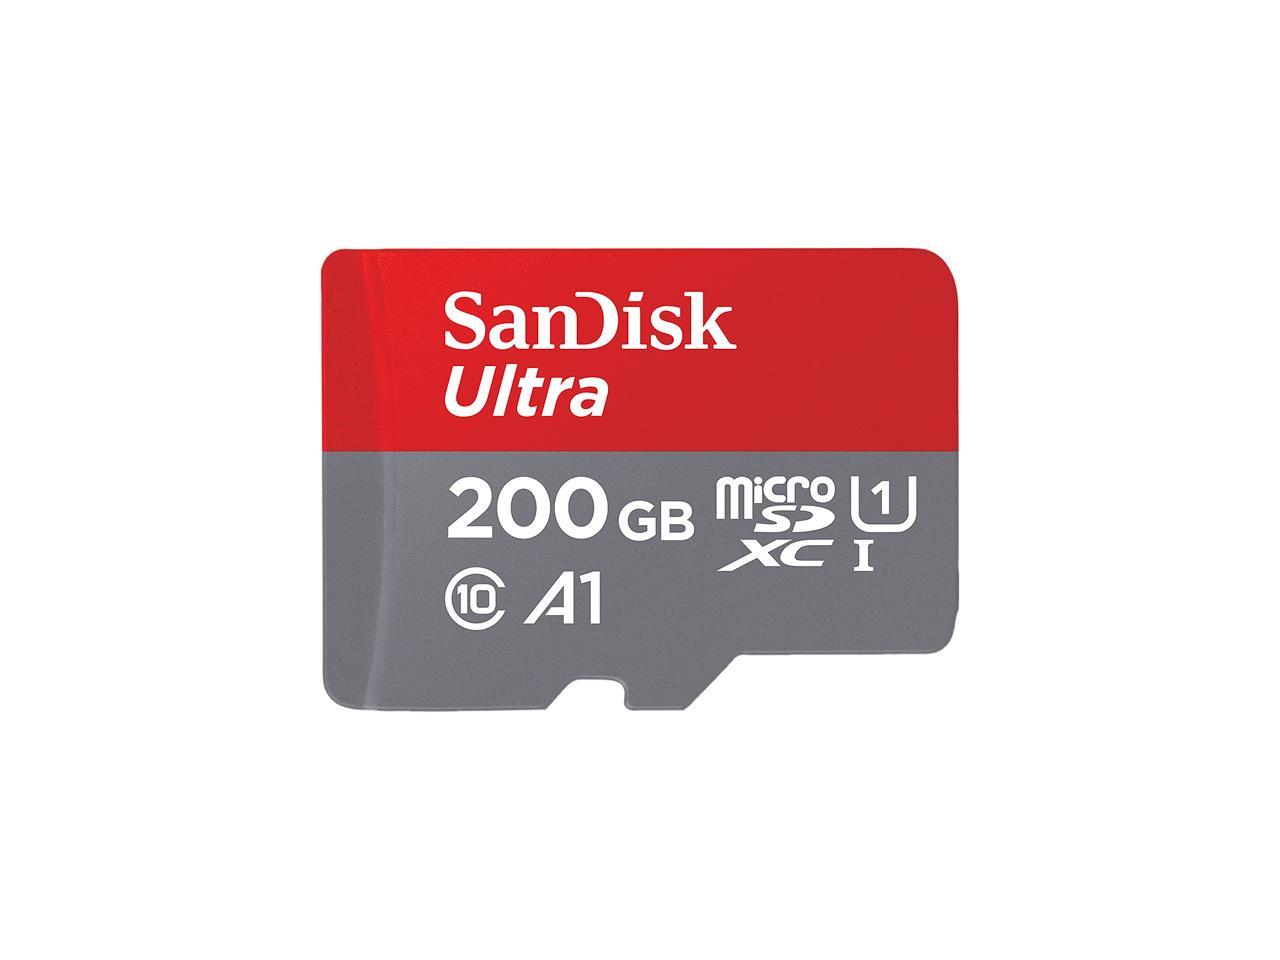 100MBs A1 U1 Works with SanDisk SanDisk Ultra 200GB MicroSDXC Verified for Canon EOS 80D by SanFlash 